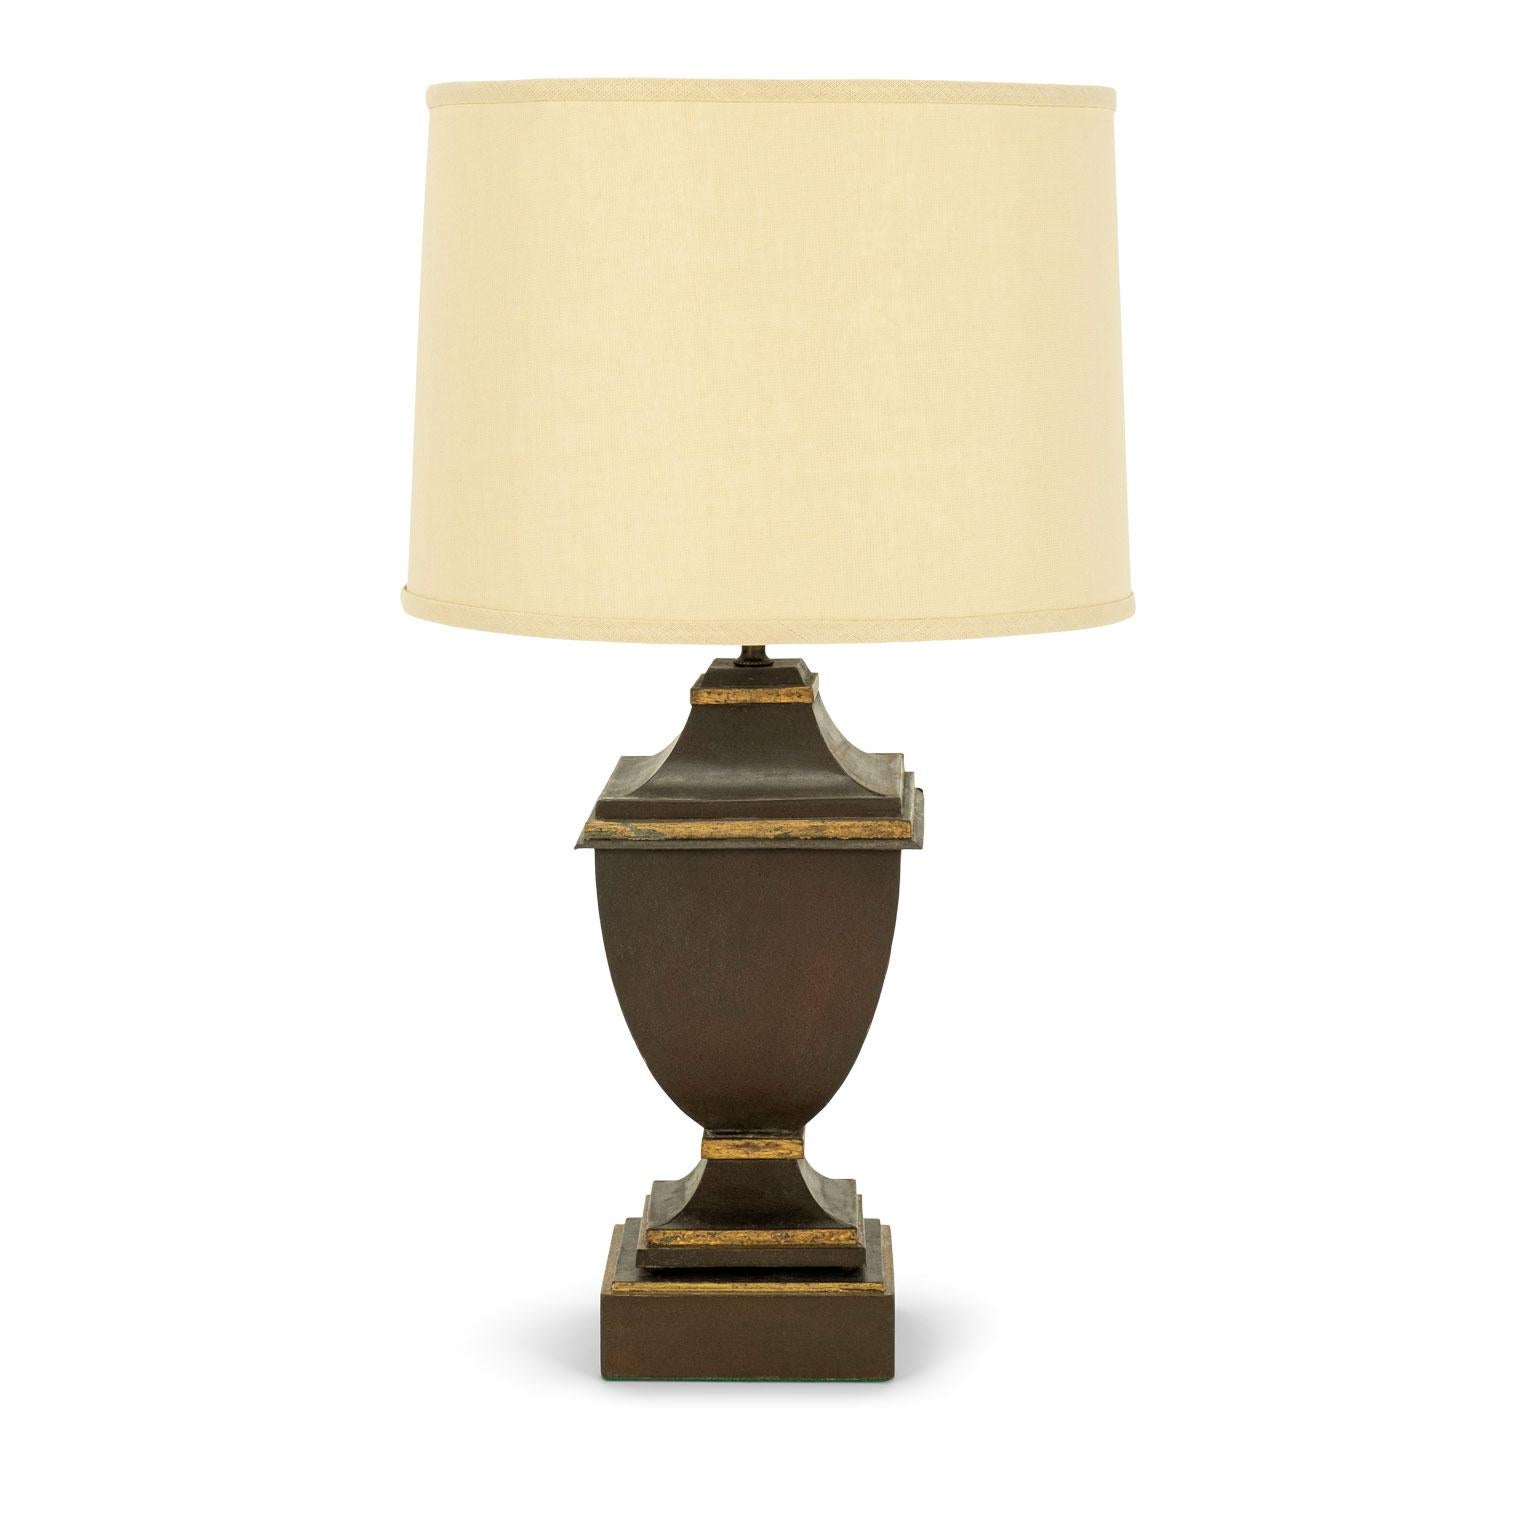 Urn-shape tole table lamp, newly wired for use within the USA using UL listed parts. Hand-painted with gilt trim decoration. Includes complimentary linen drum shade (listed measurements include shade).

Note: Original/early finish on antique and